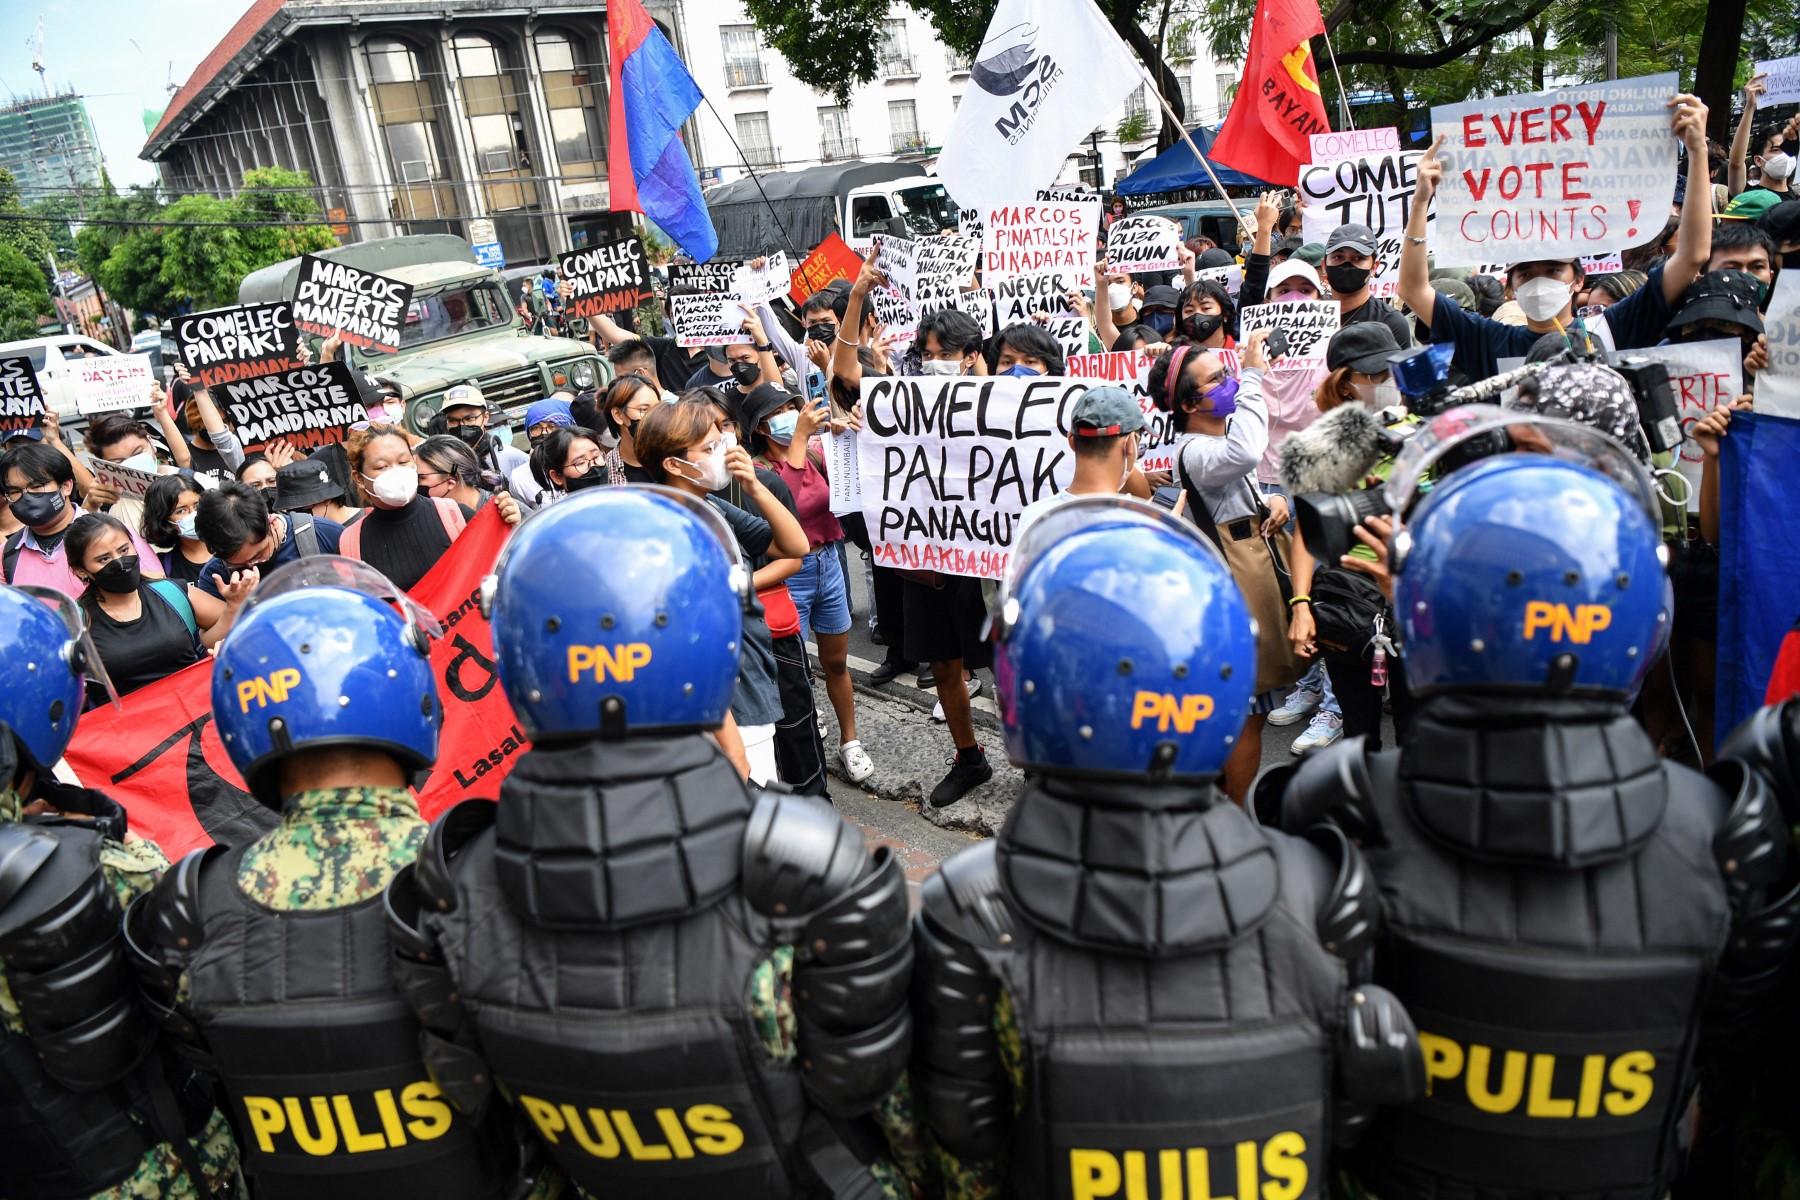 People display placards during a rally in front of the commission on elections in Manila on May 10, to protest against the results of the May 9 presidential election. Photo: AFP